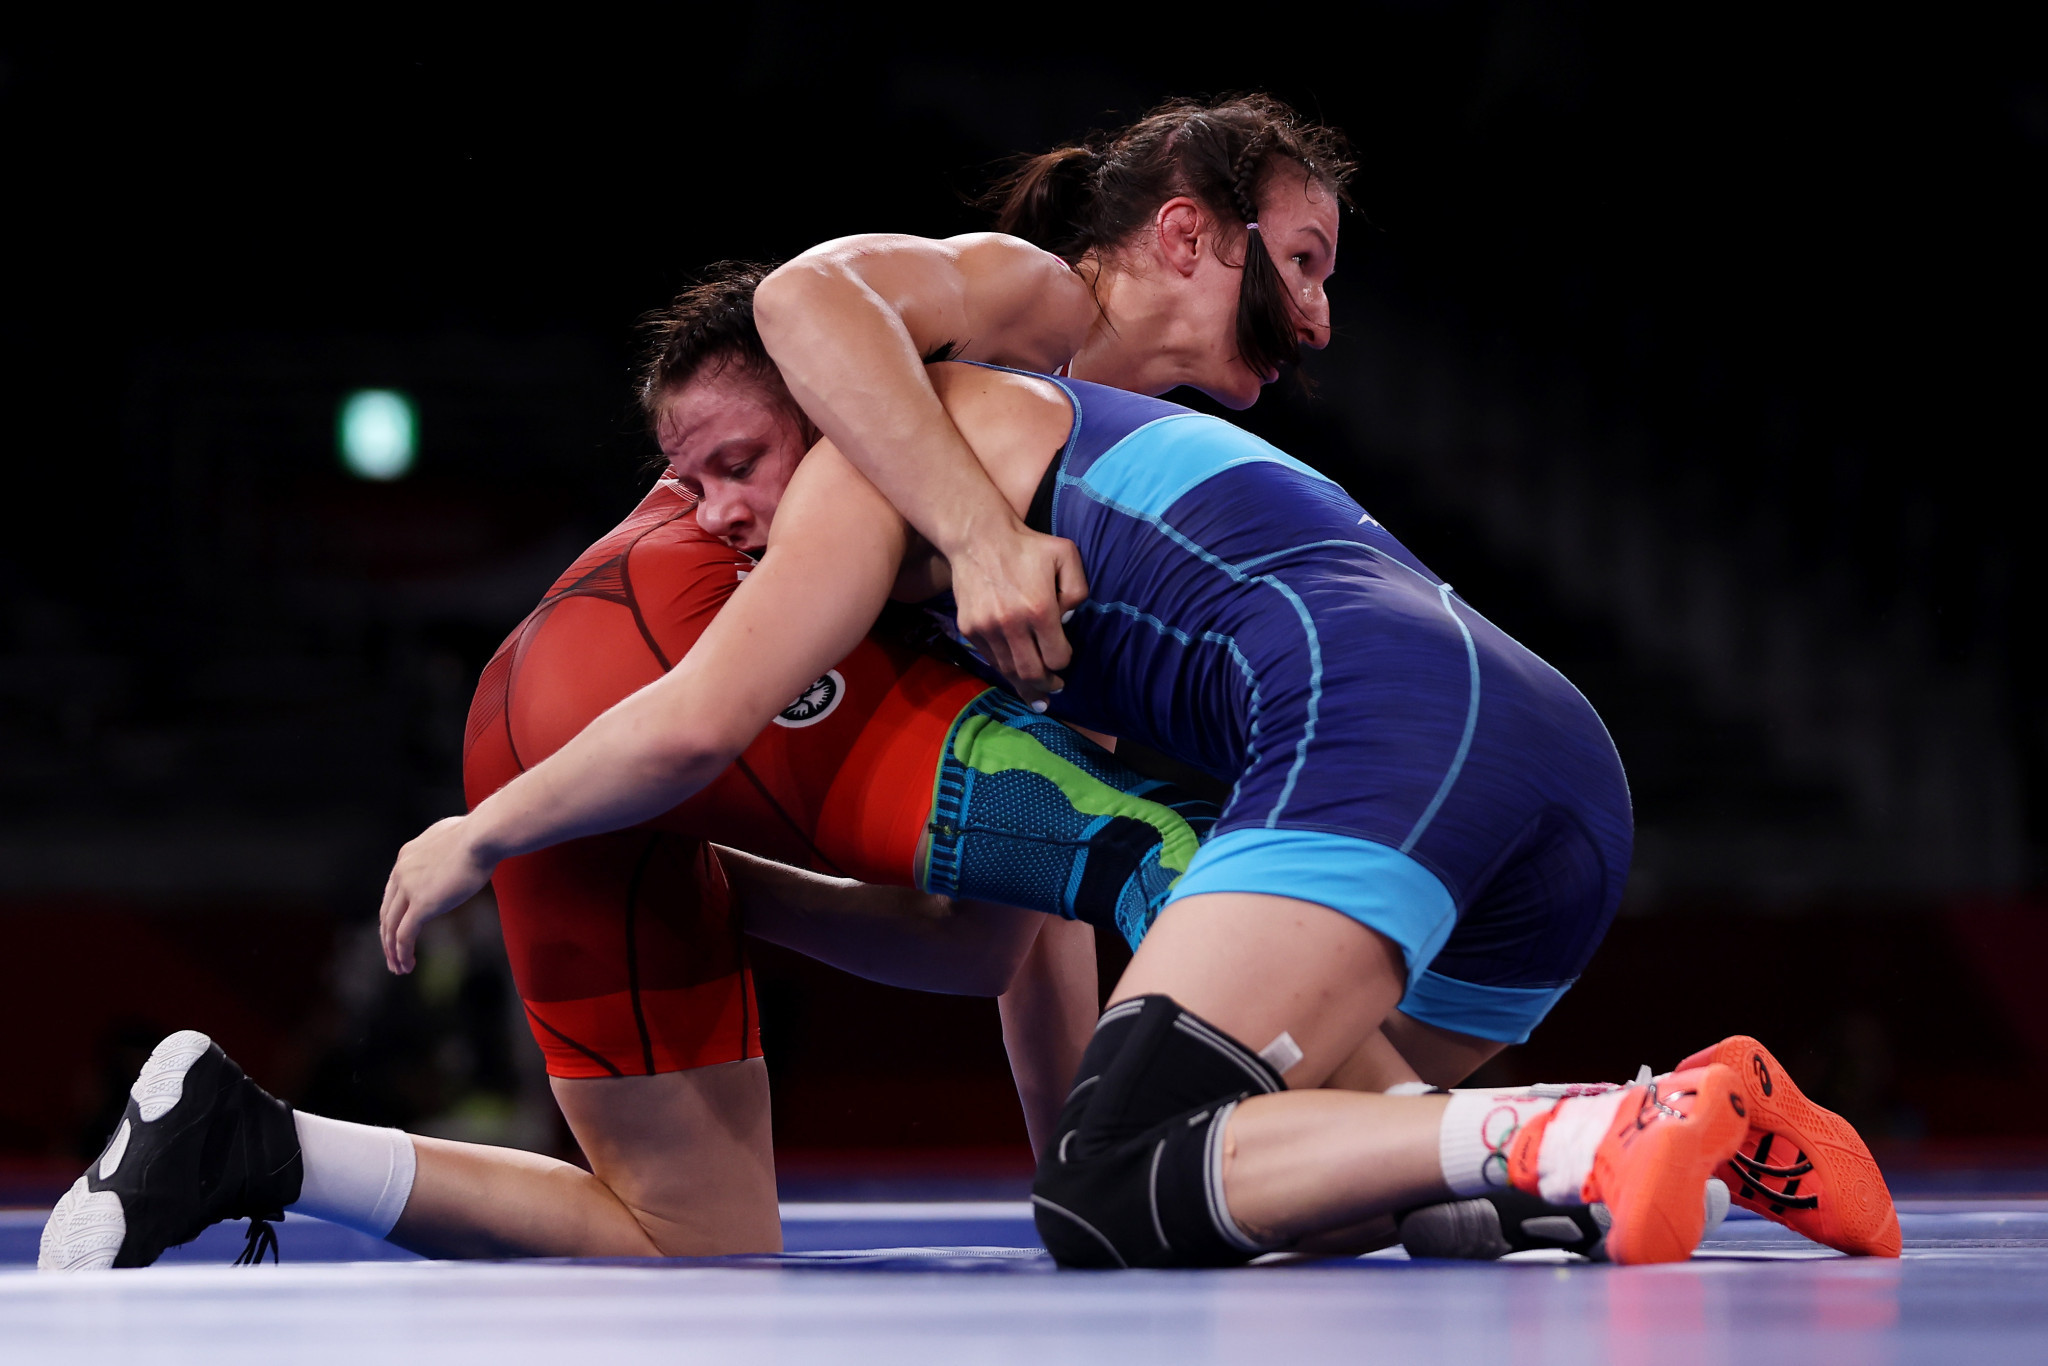 Ukraine take golden double at European Wrestling Championships after day four disappointment